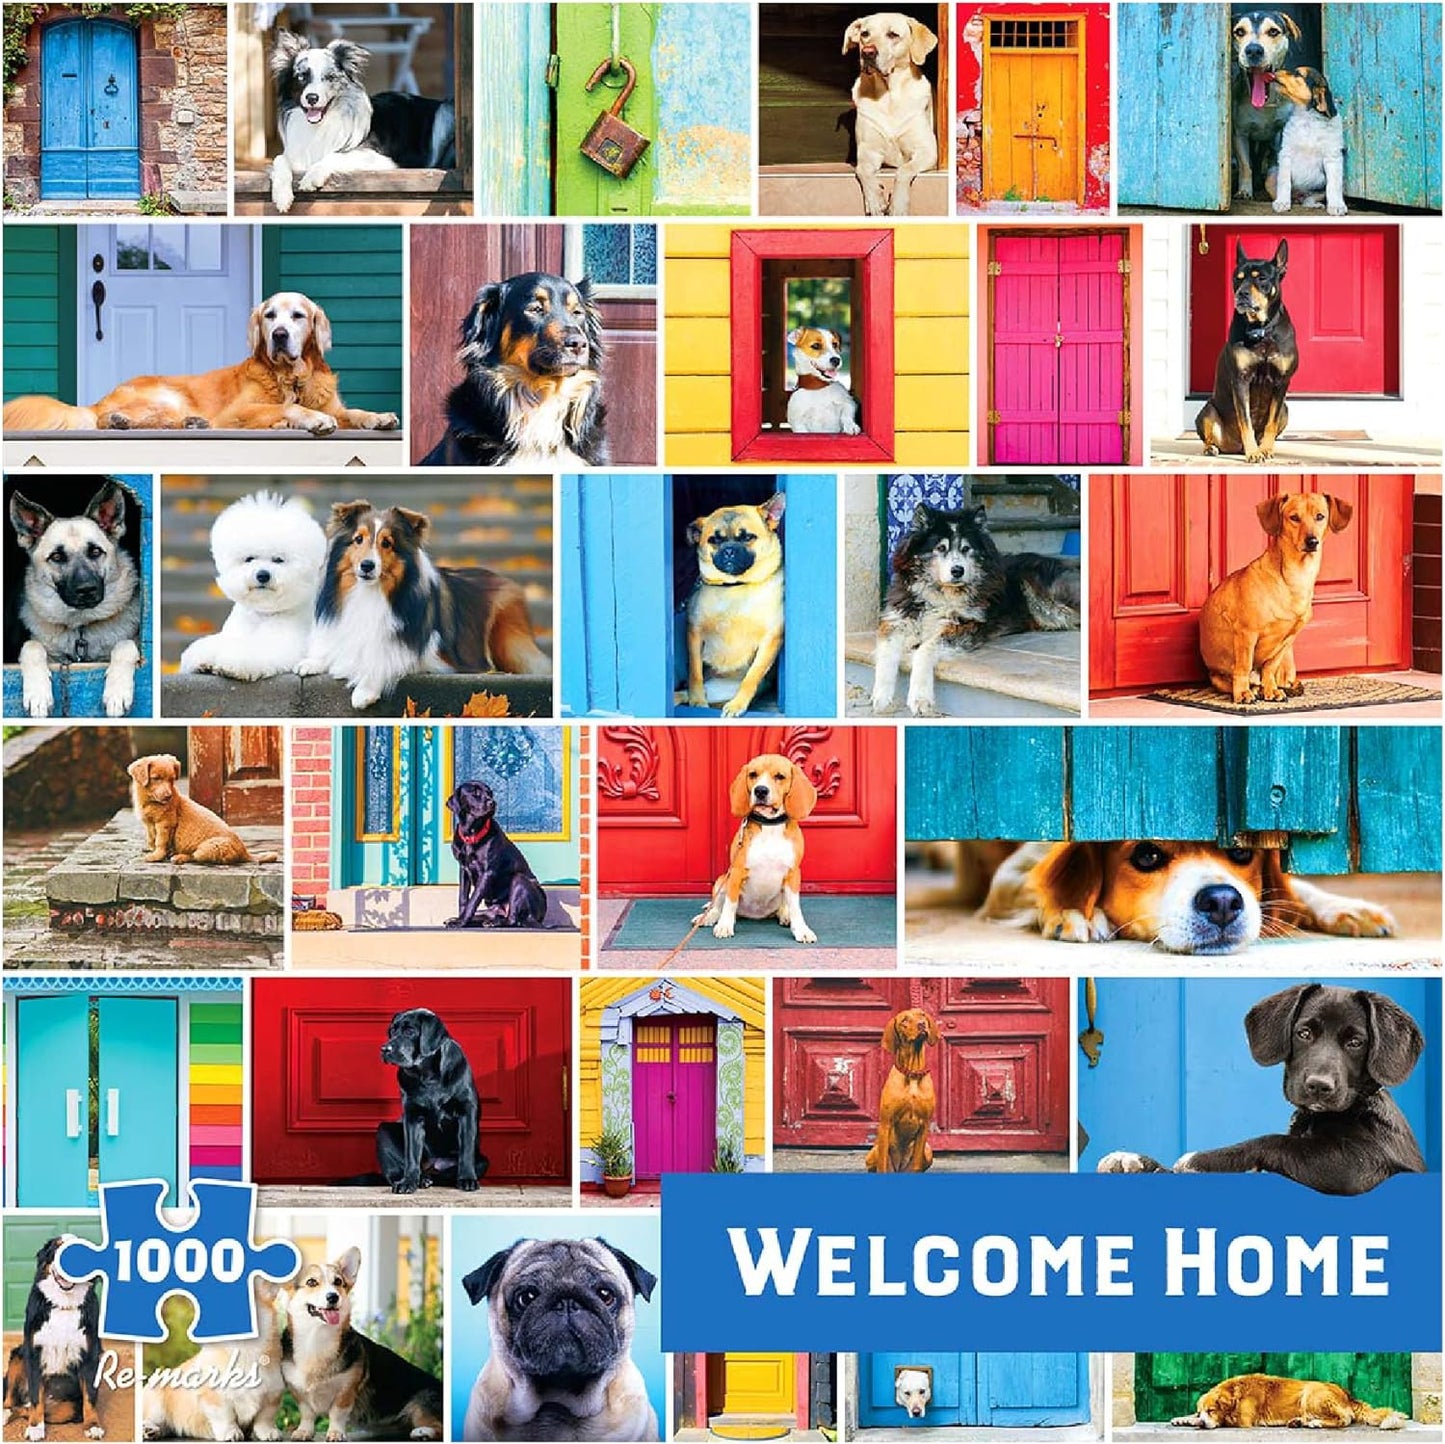 Welcome Home Collage 1000-Piece Jigsaw Puzzle